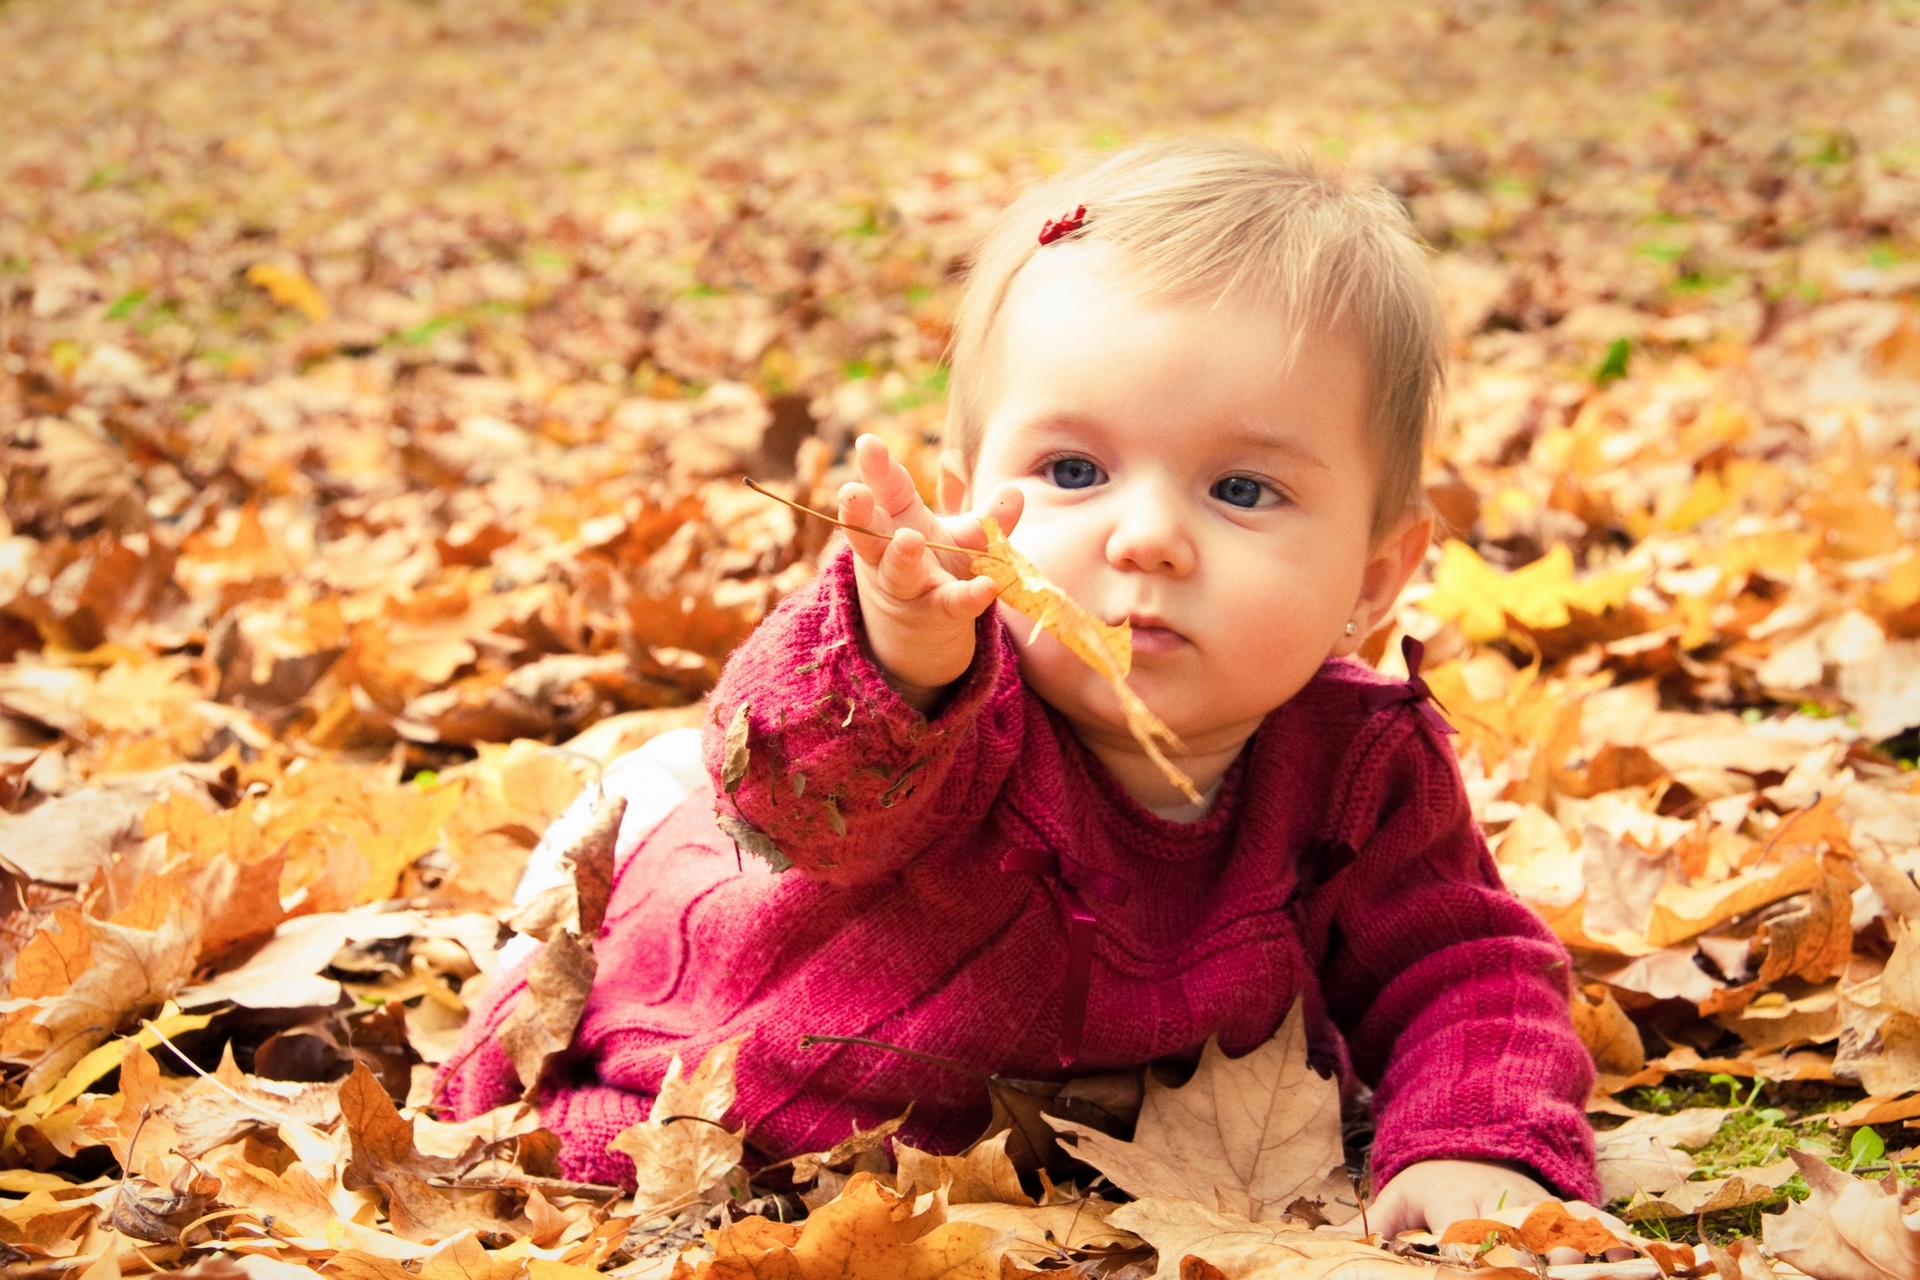 Cute baby girl playing with leaves in autumn